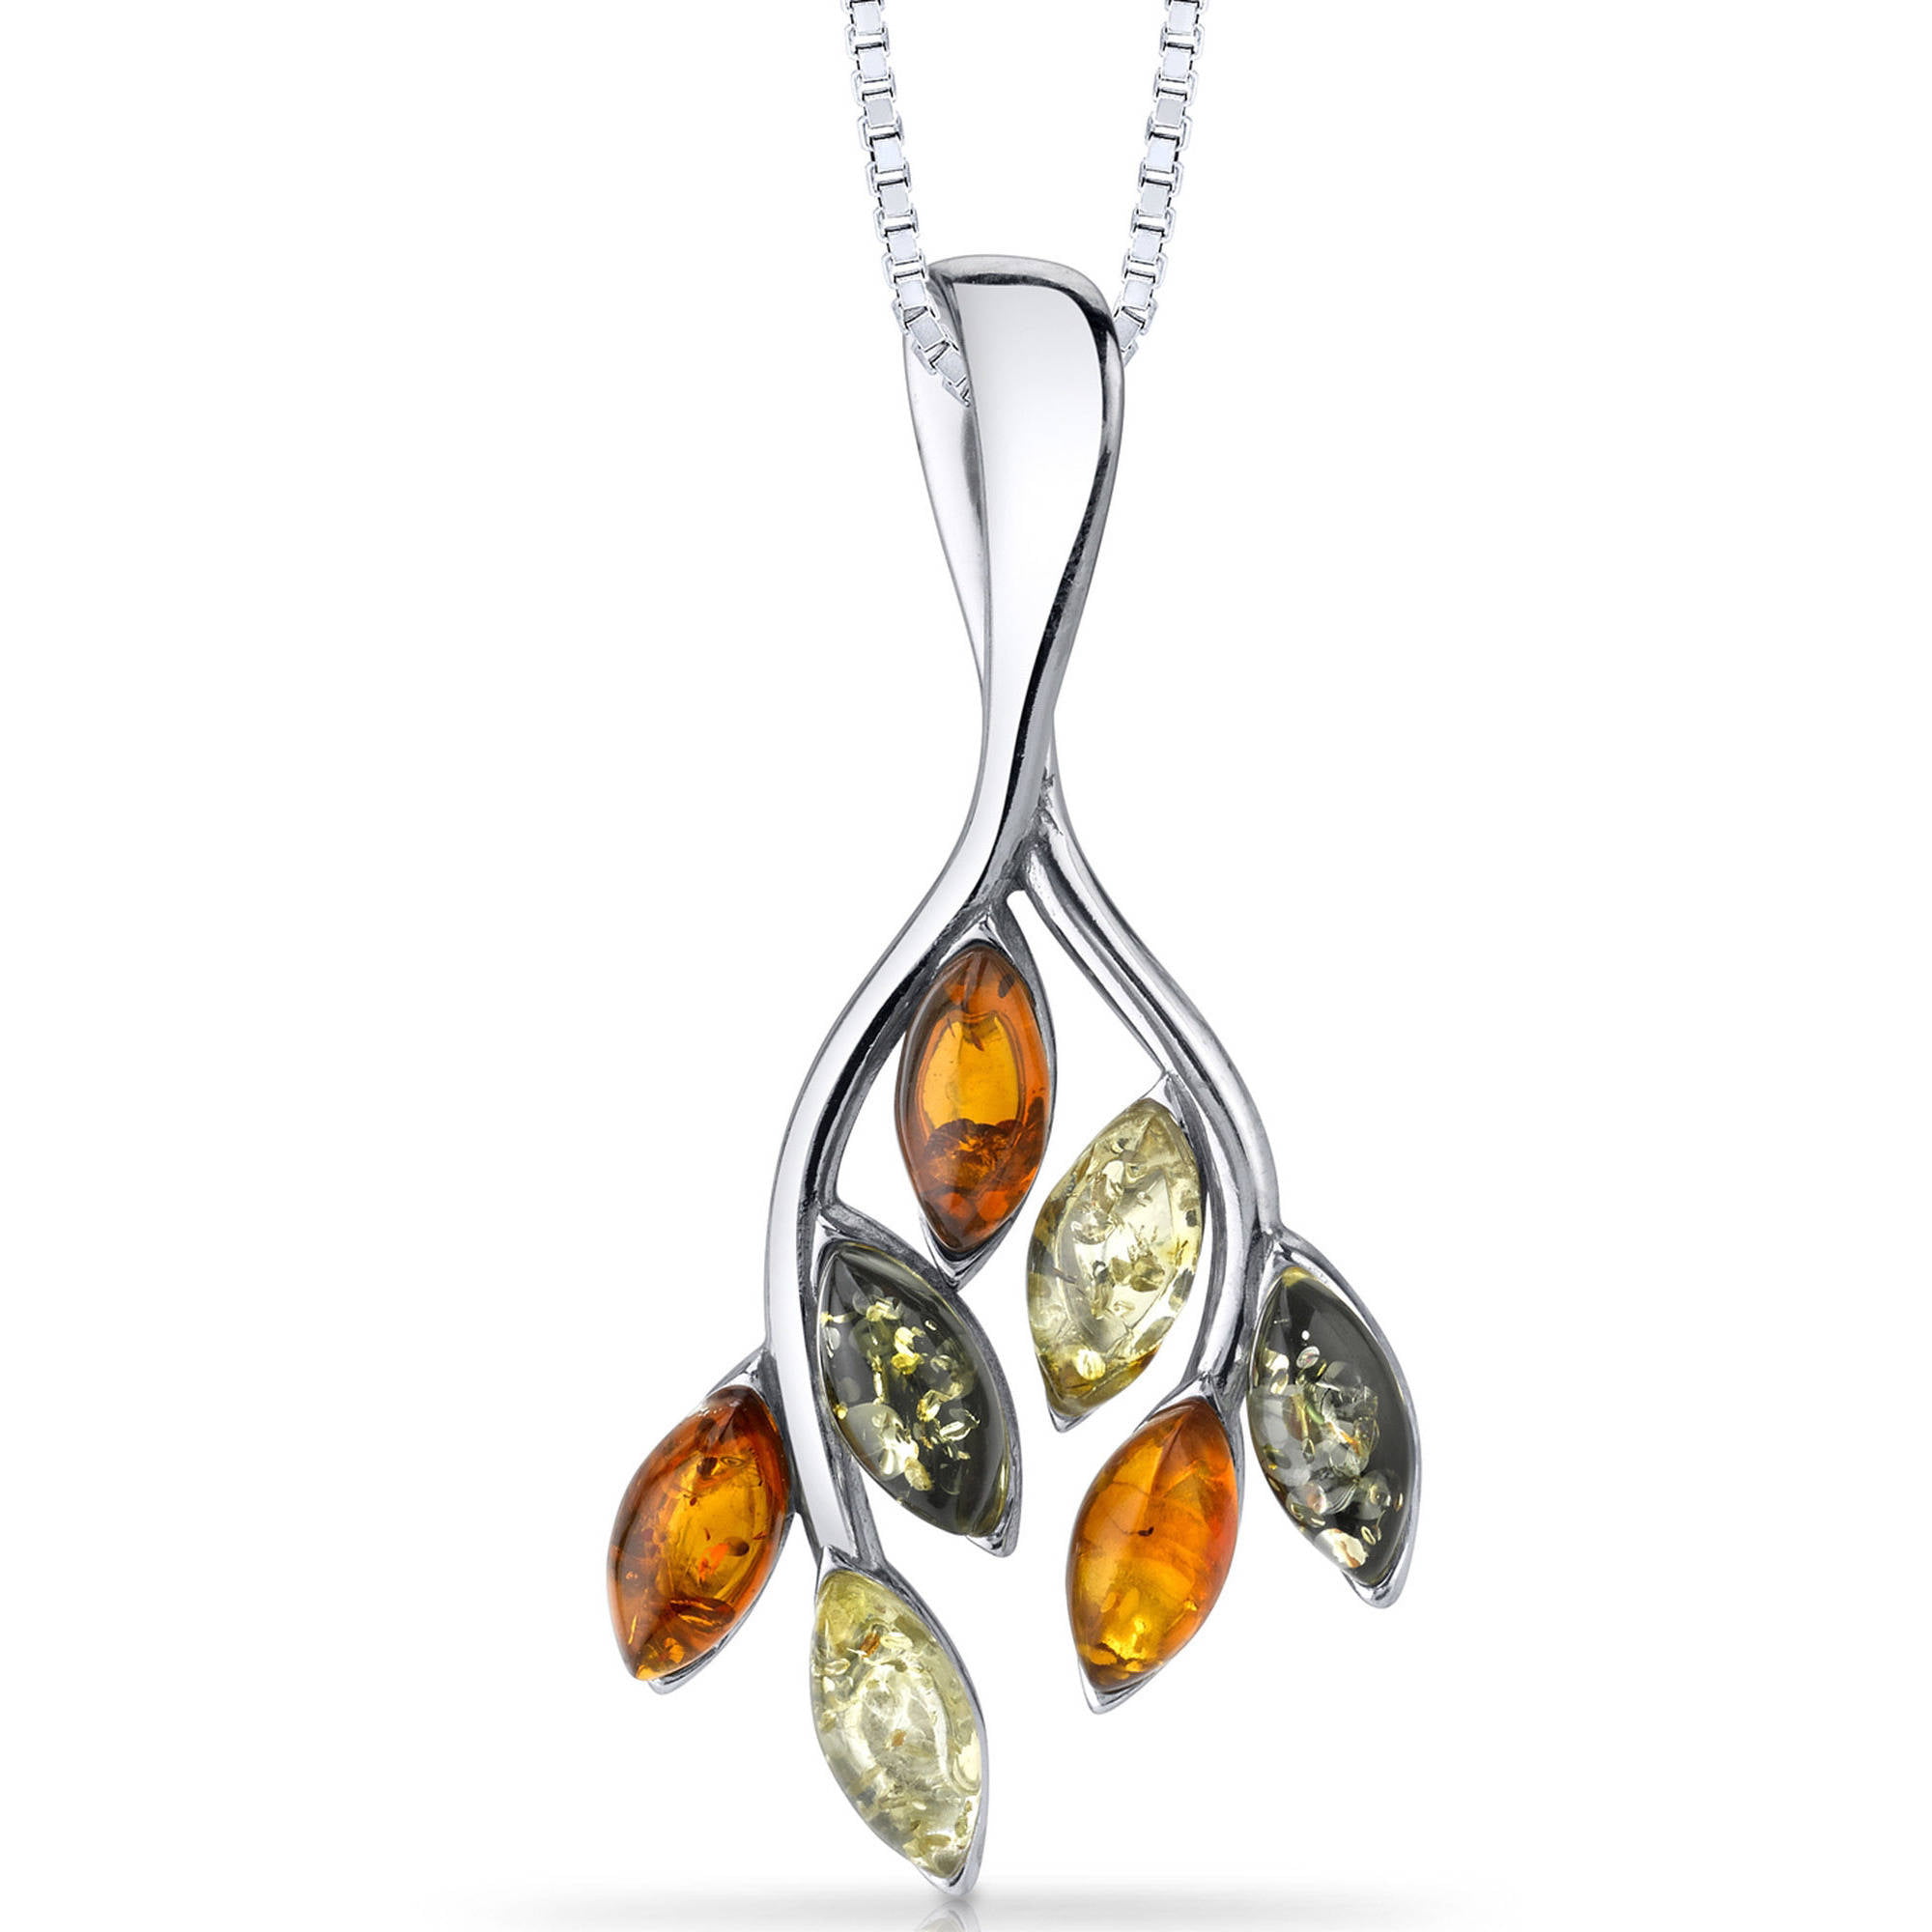 BALTIC AMBER STERLING SILVER 925 HEART SHAPED FLOWER LEAF PENDANT NECKLACE BOXED 